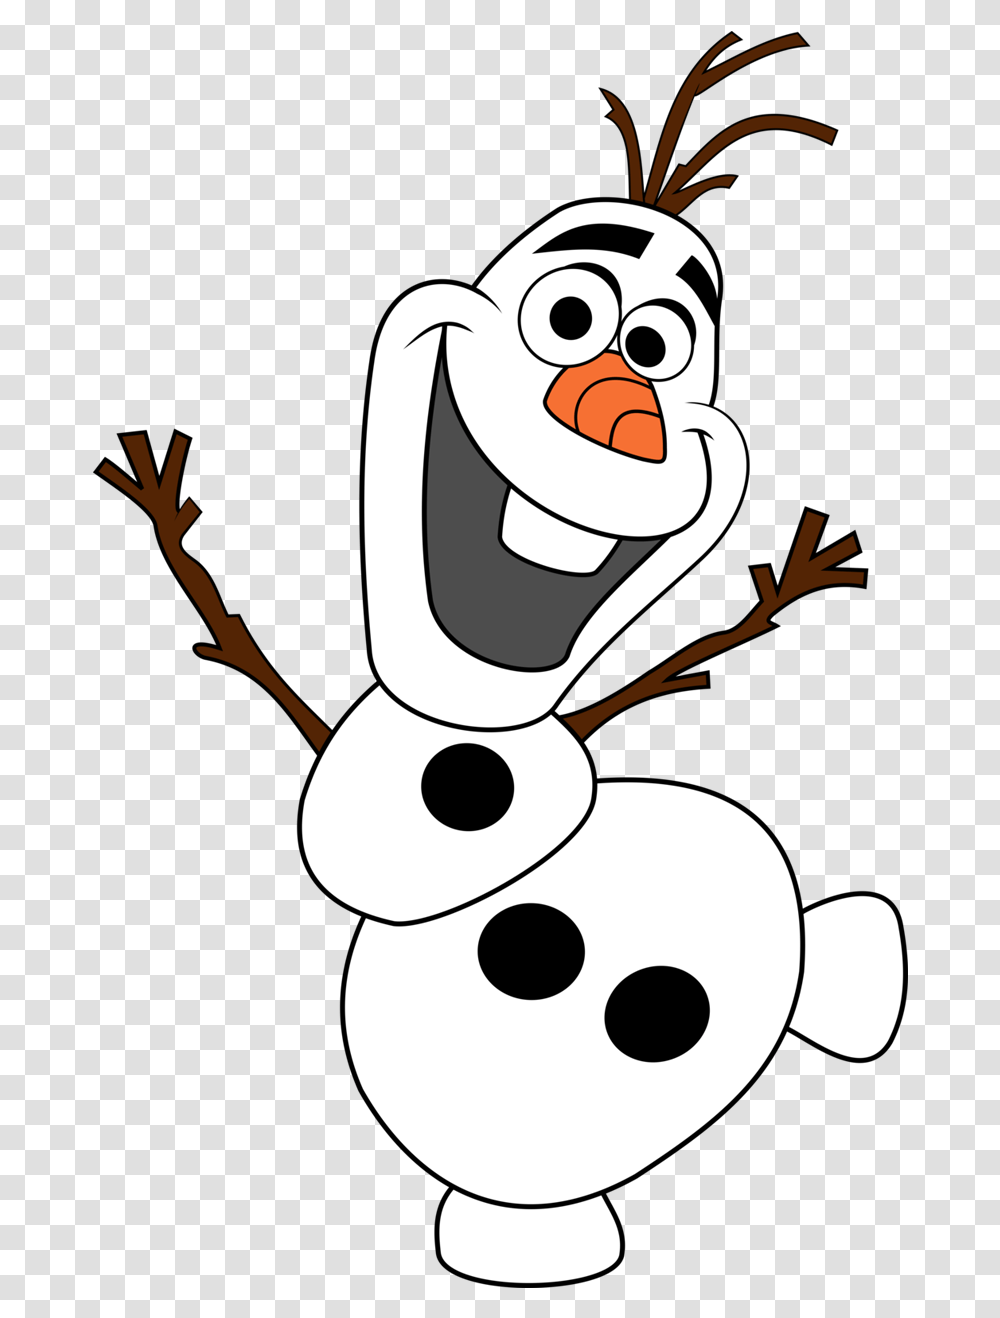 Olaf Cute Image Olaf Frozen Cartoon, Snowman, Outdoors, Nature, Animal Transparent Png